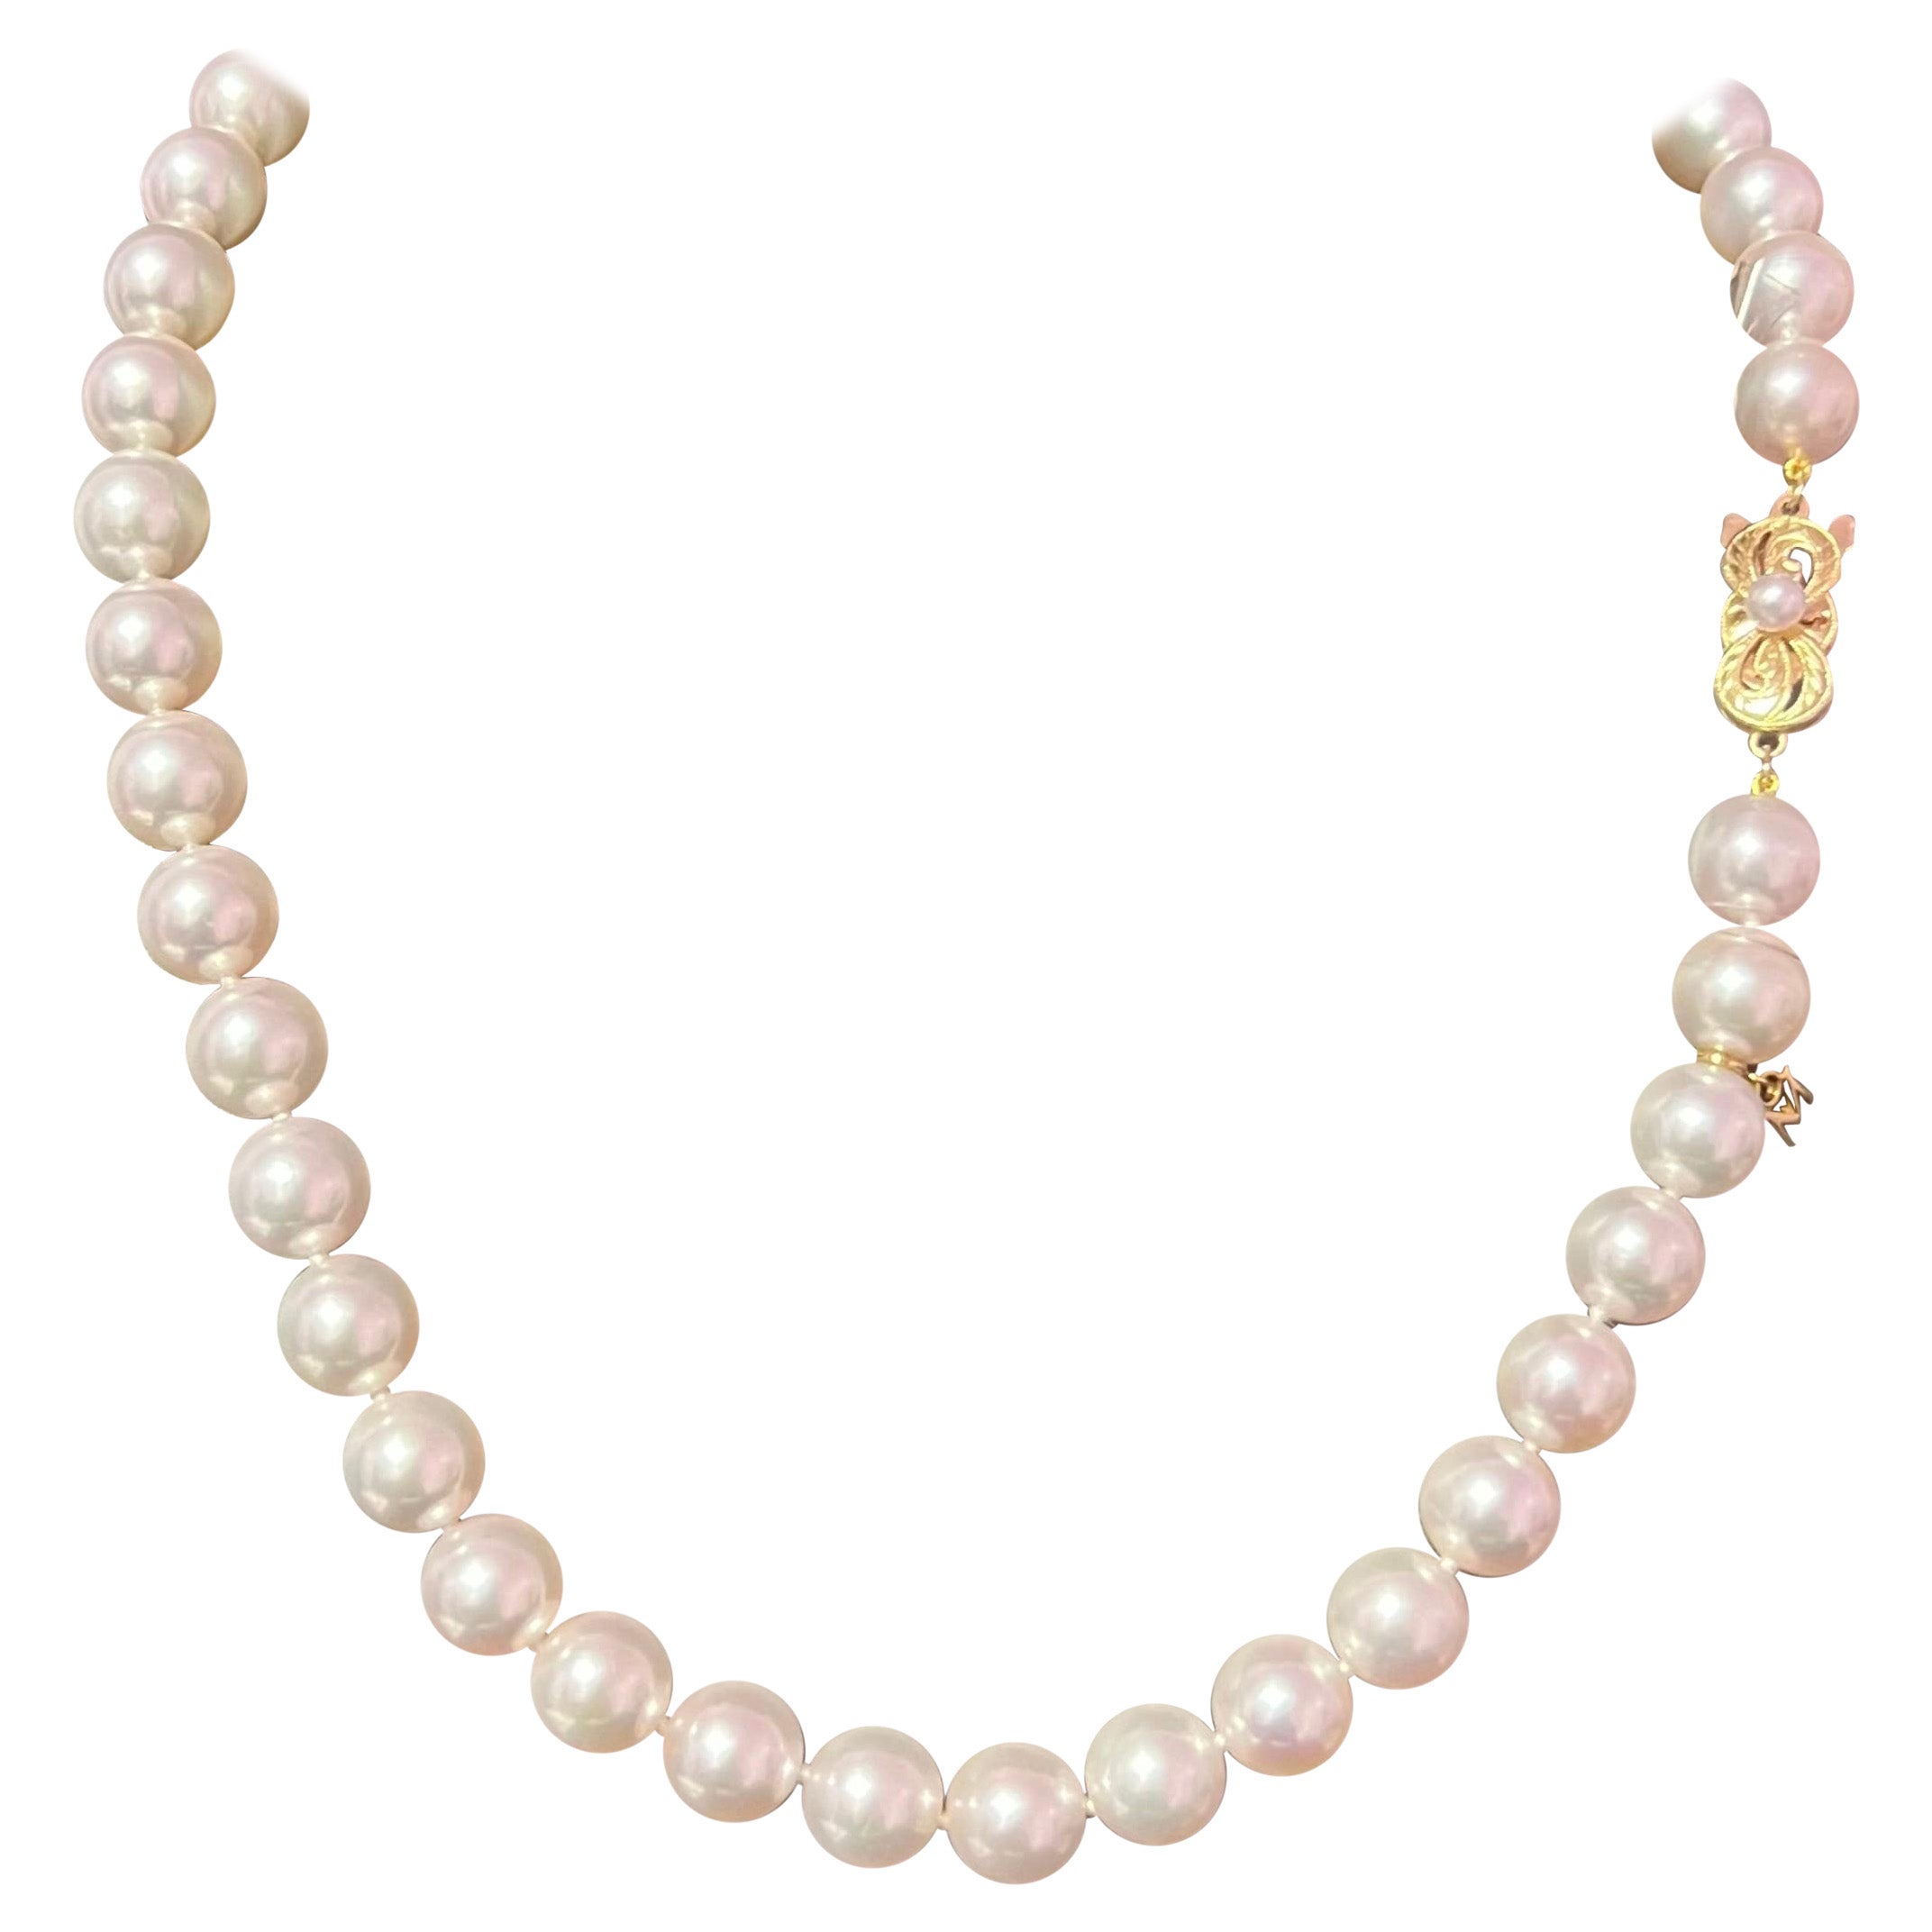 Mikimoto Estate Akoya Pearl Necklace 18k Gold 9.5 mm Certified M35435